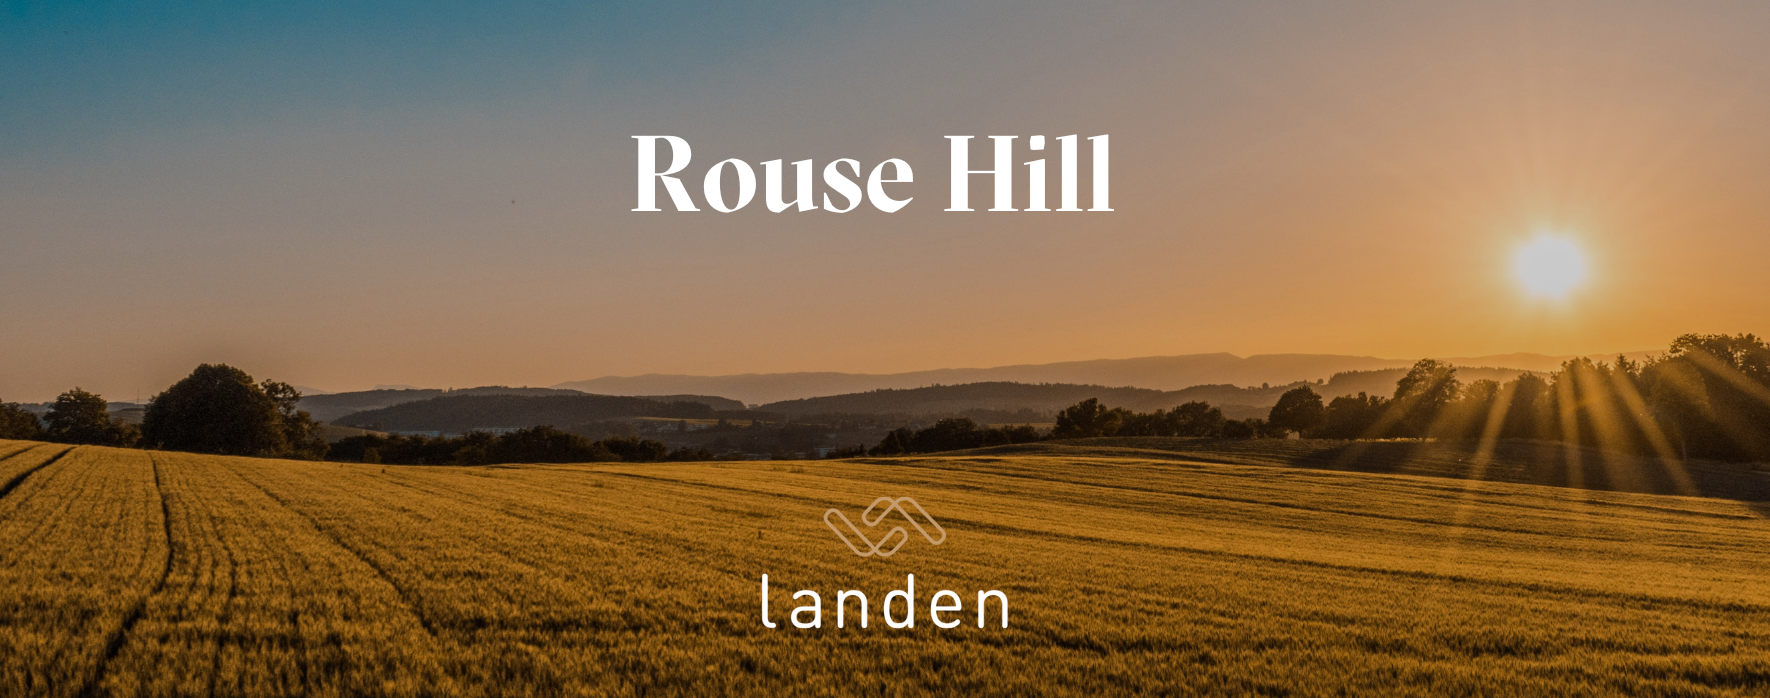 rouse-hill-land-for-sale-sydney